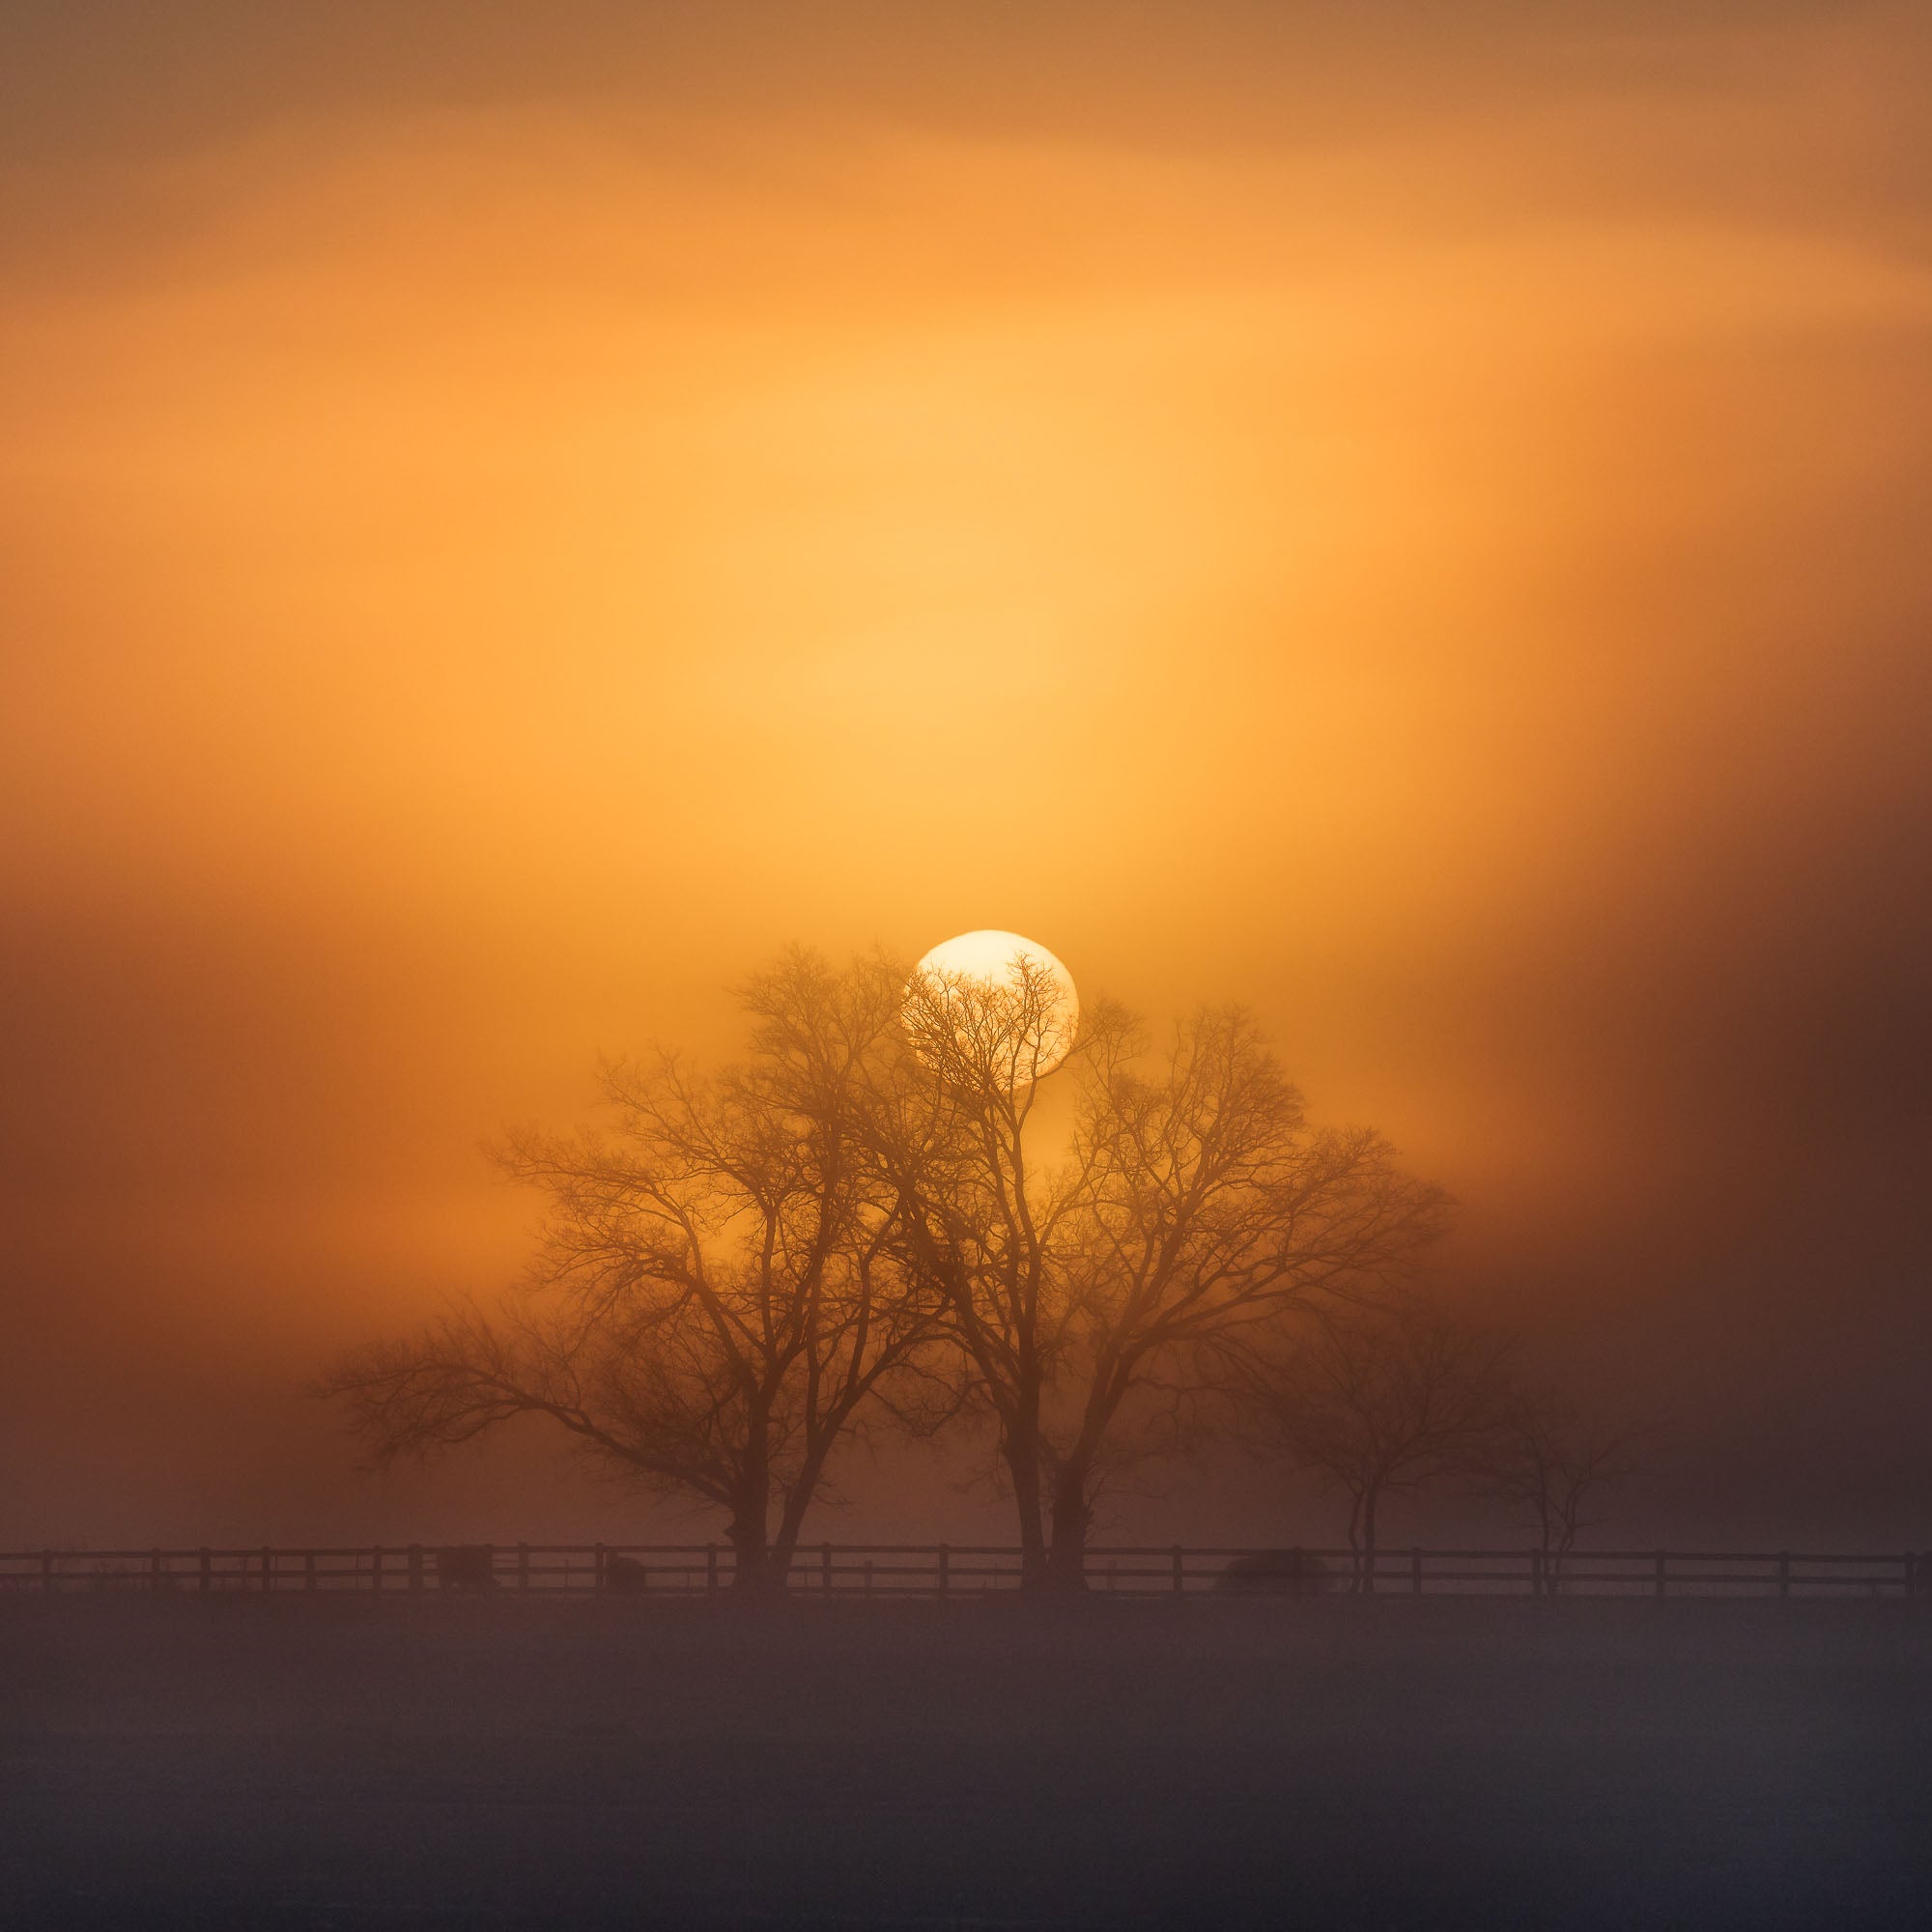 A misty sunrise at Richmond Lowlands with the sun perfectly aligned behind tree branches, creating a stunning natural silhouette.